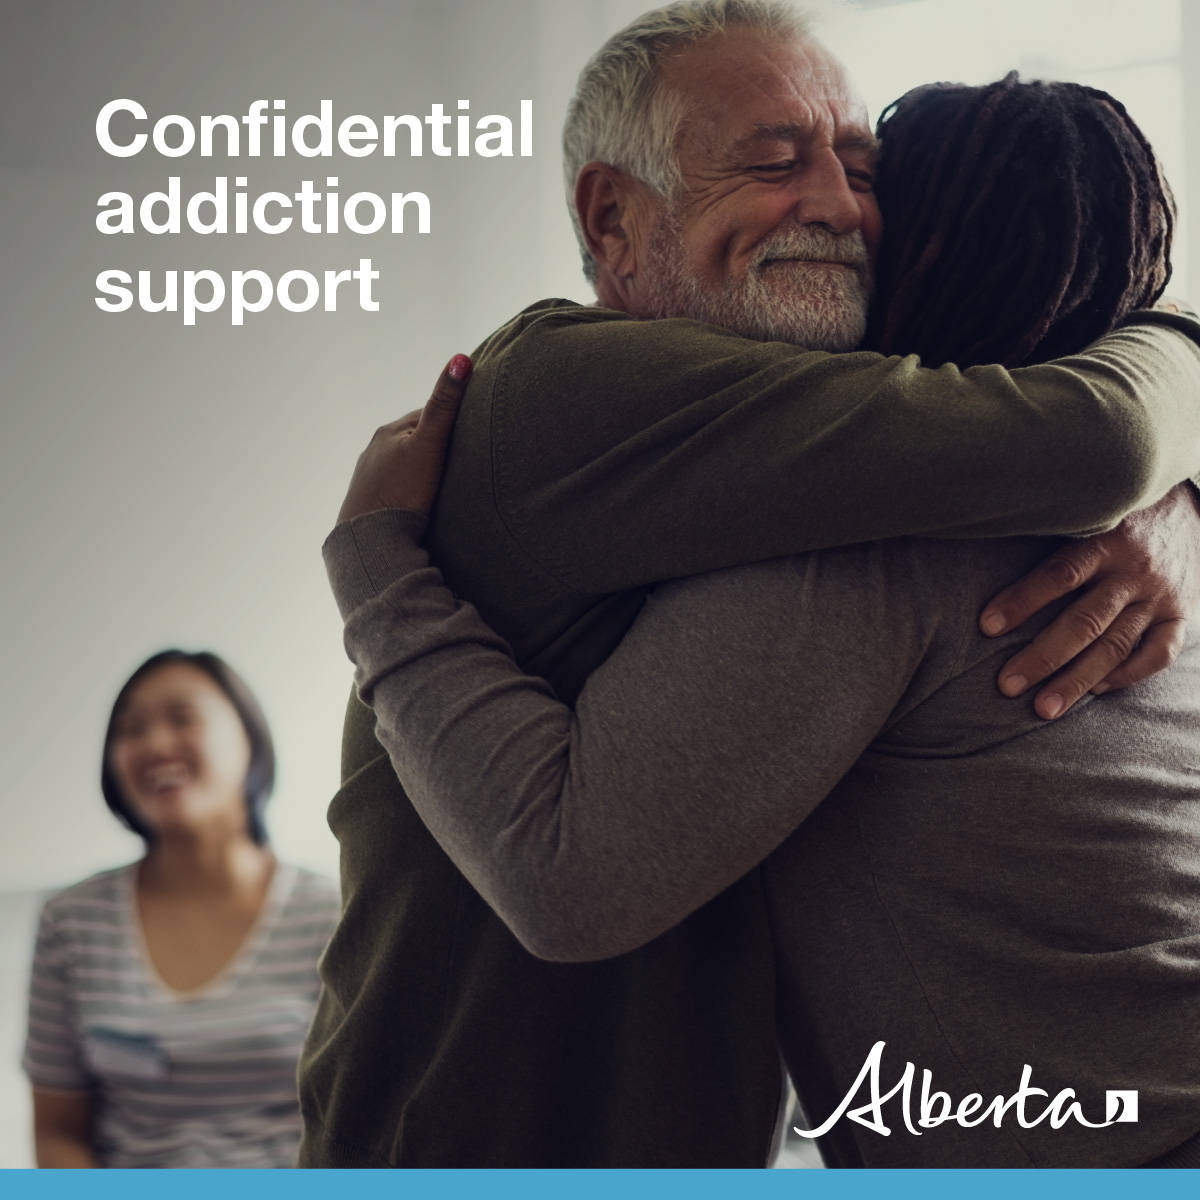 The holidays can be difficult when you or someone close to you is struggling with addiction. The best gift you can give your loved ones is taking the first step towards recovery. Free, confidential help is available 24/7: @211Alberta - call or text 211.